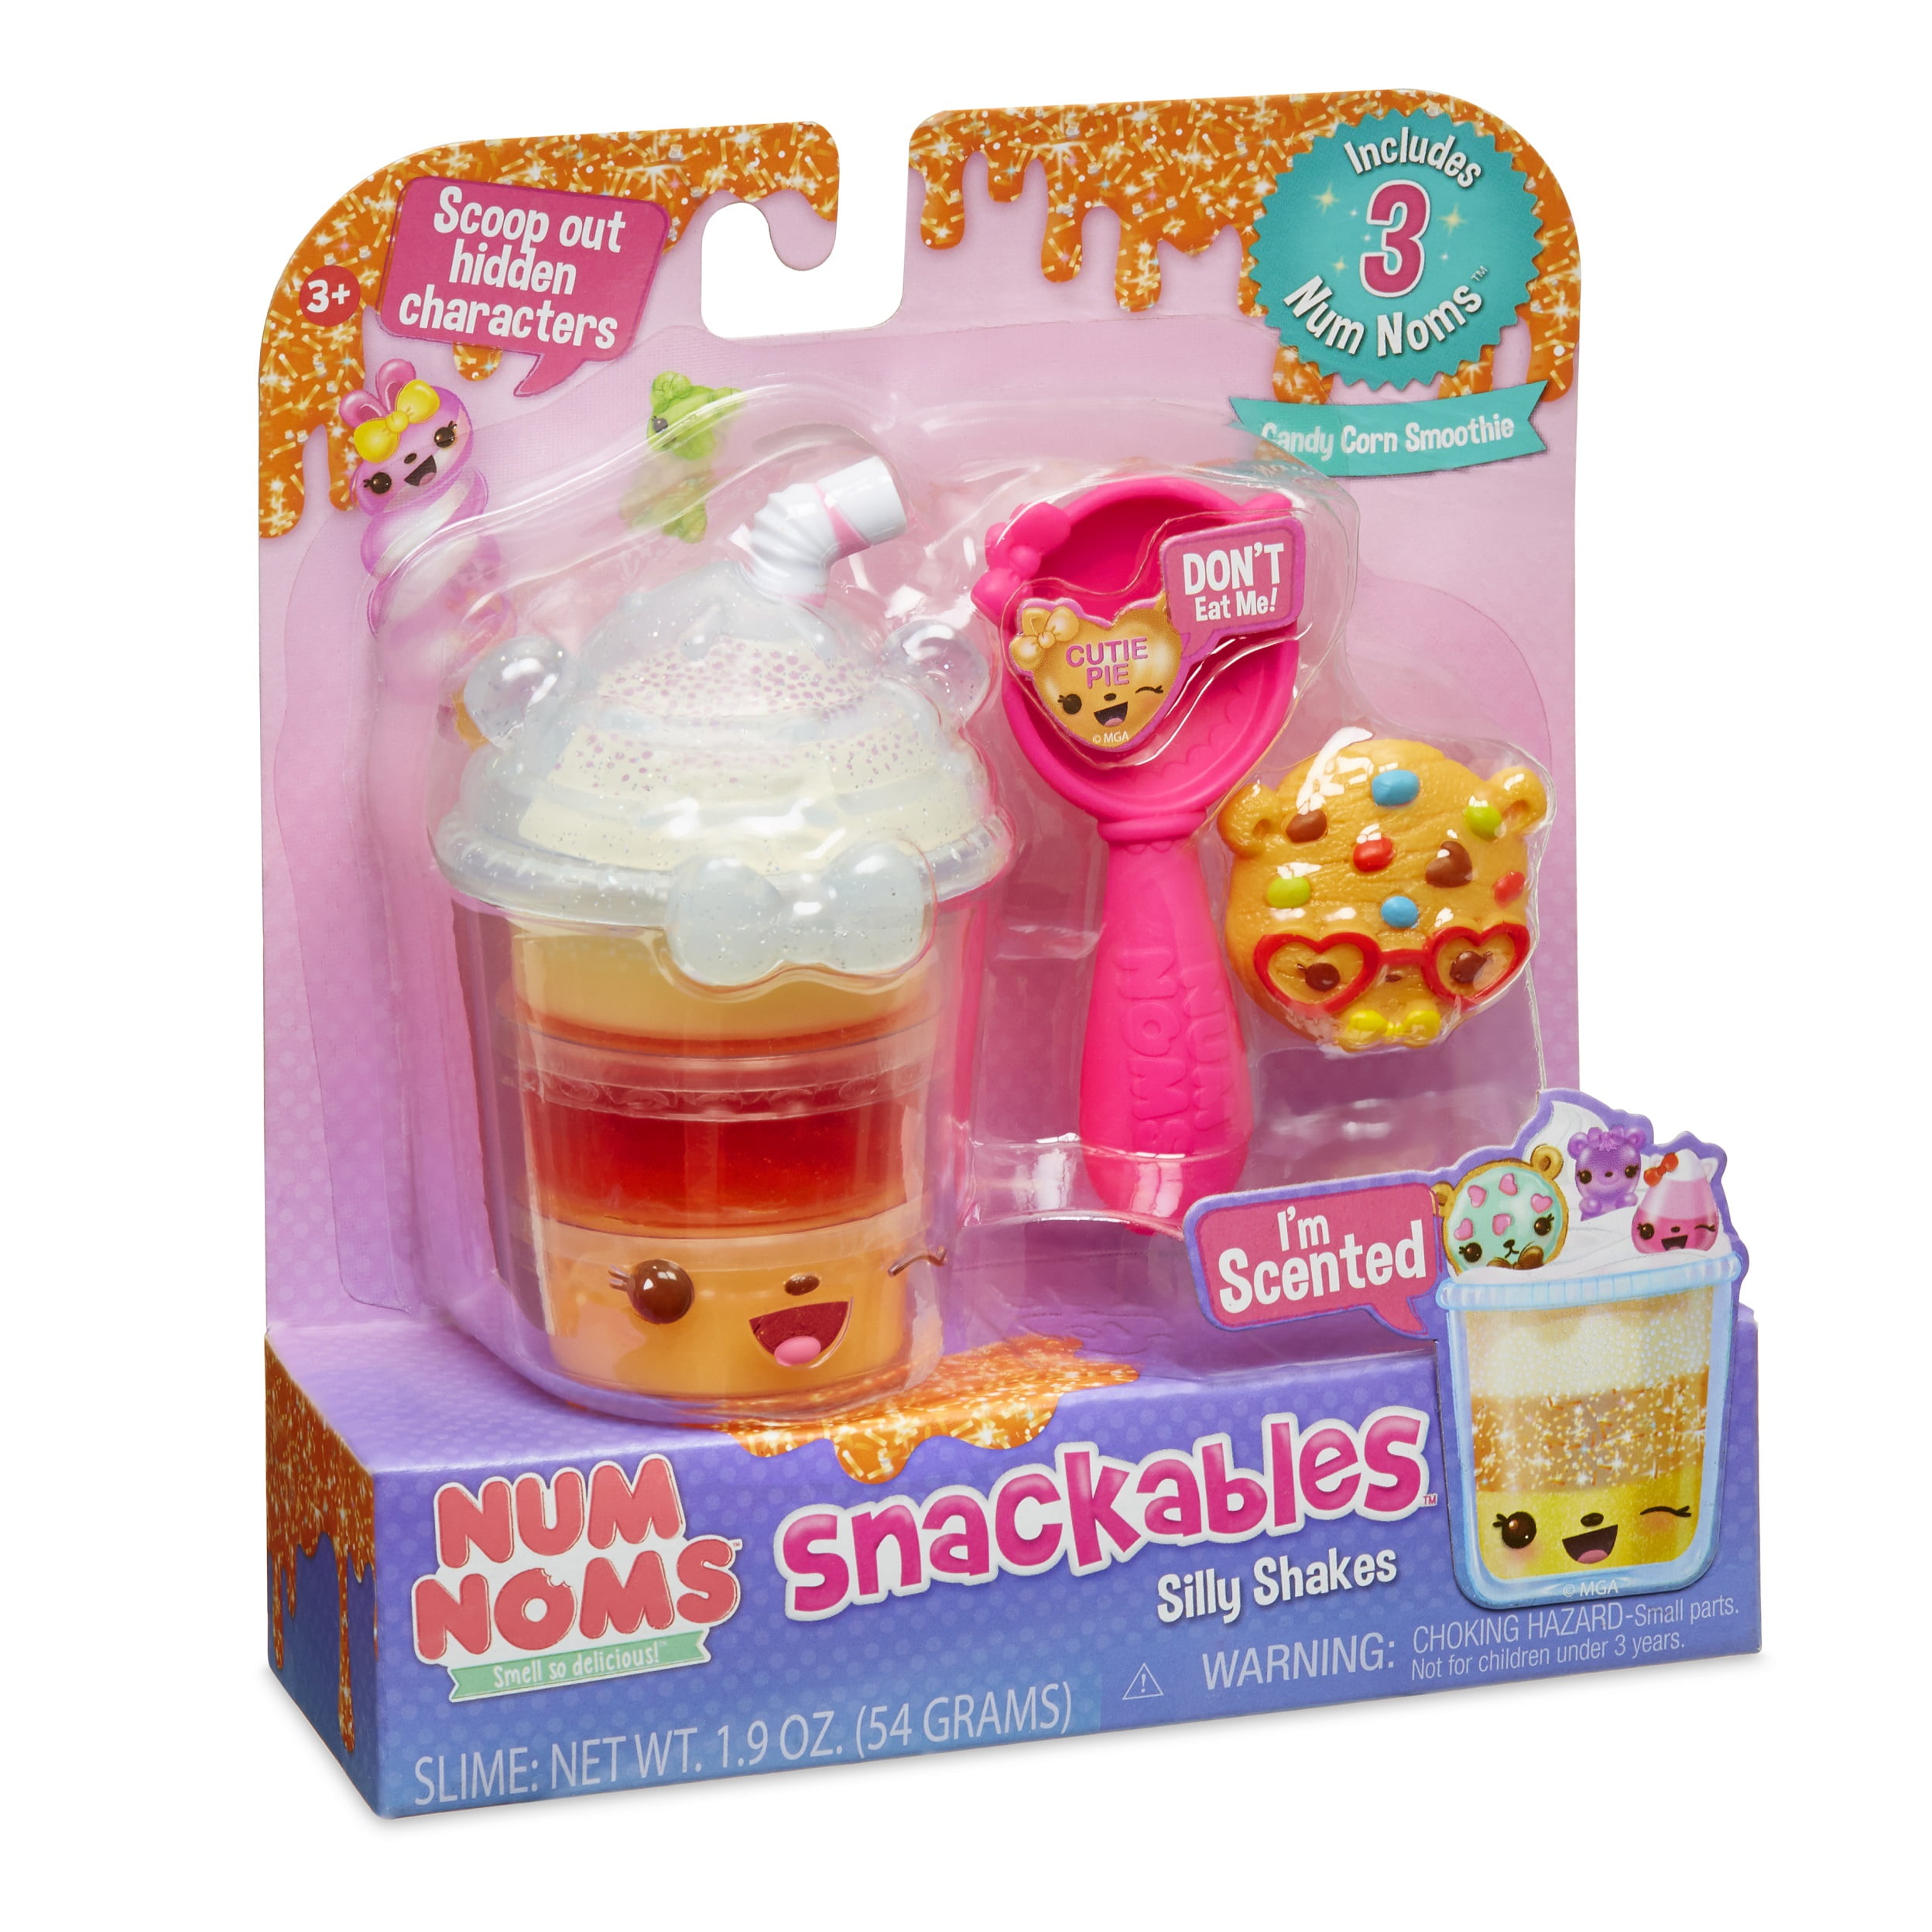  Num Noms Snackables Silly Shakes- Candy Corn Smoothie